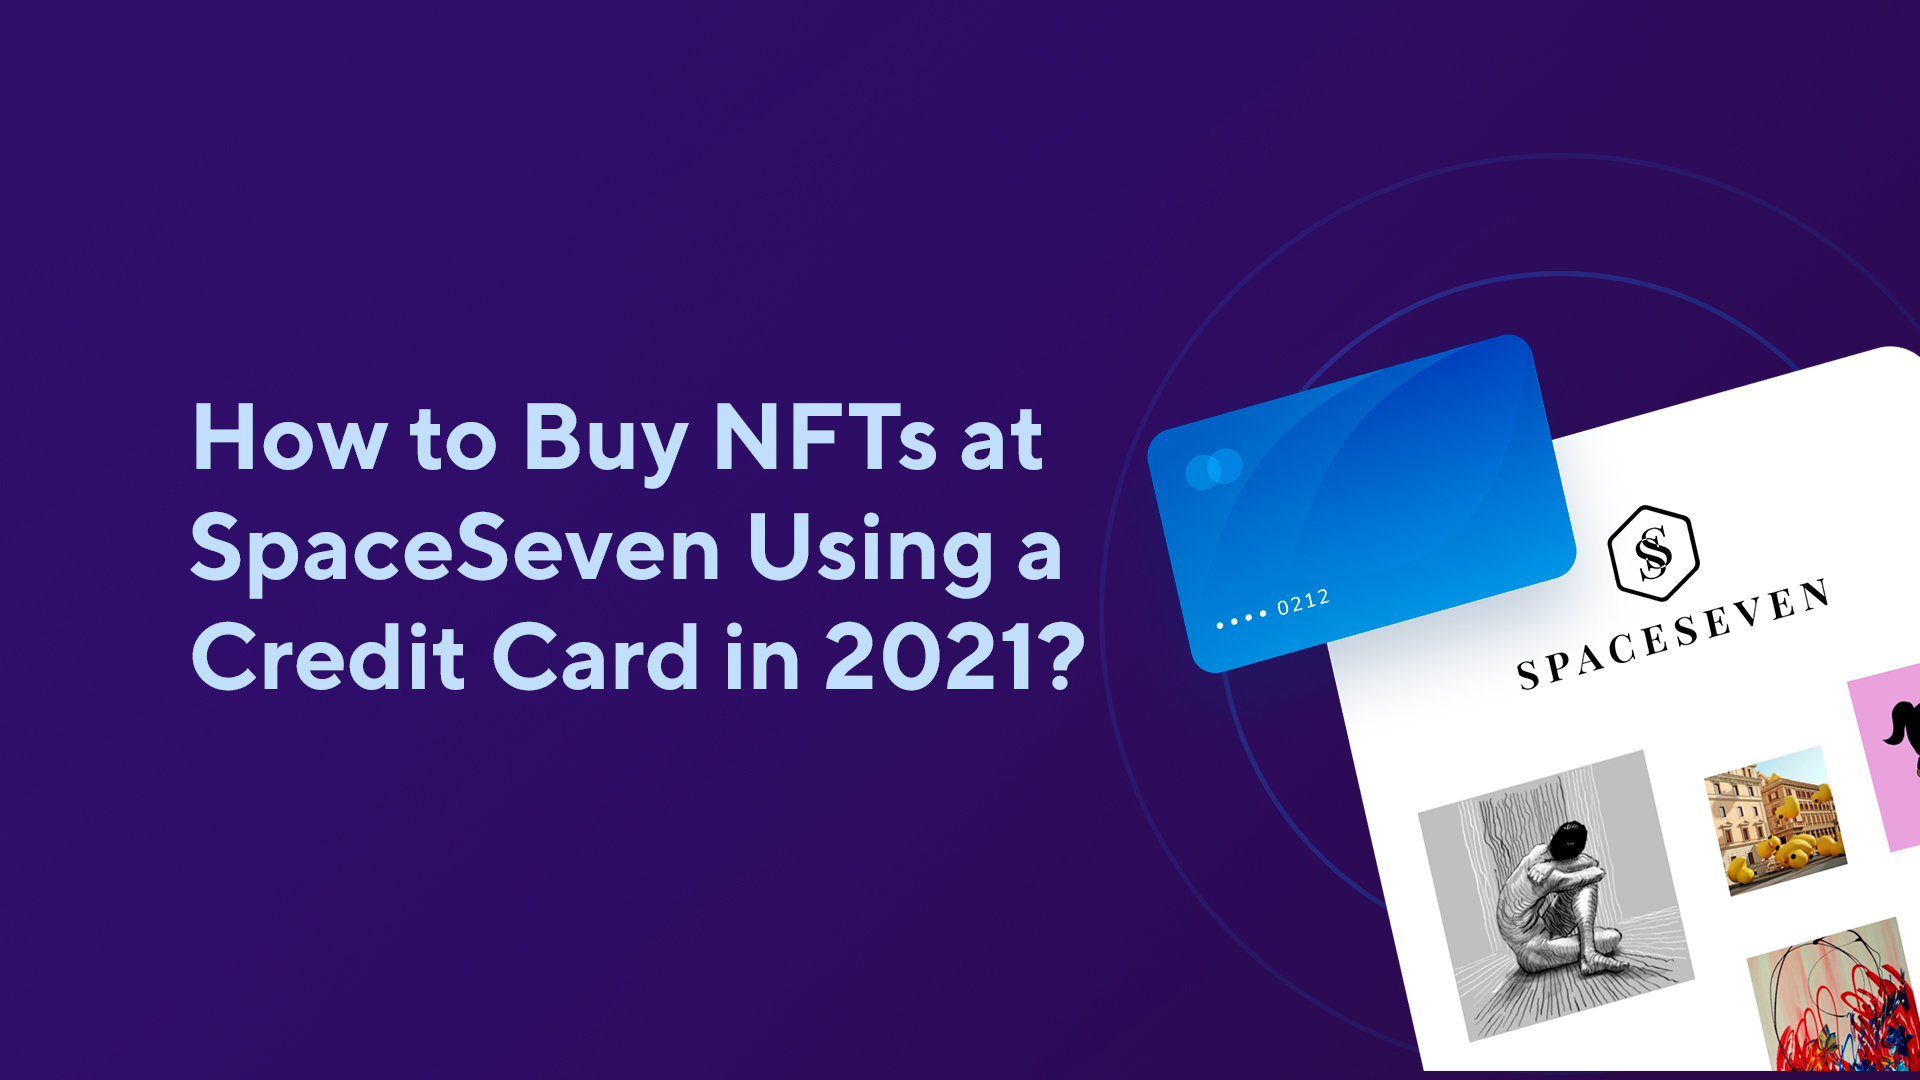 How to Buy NFTs at SpaceSeven Using a Credit Card in 2023?